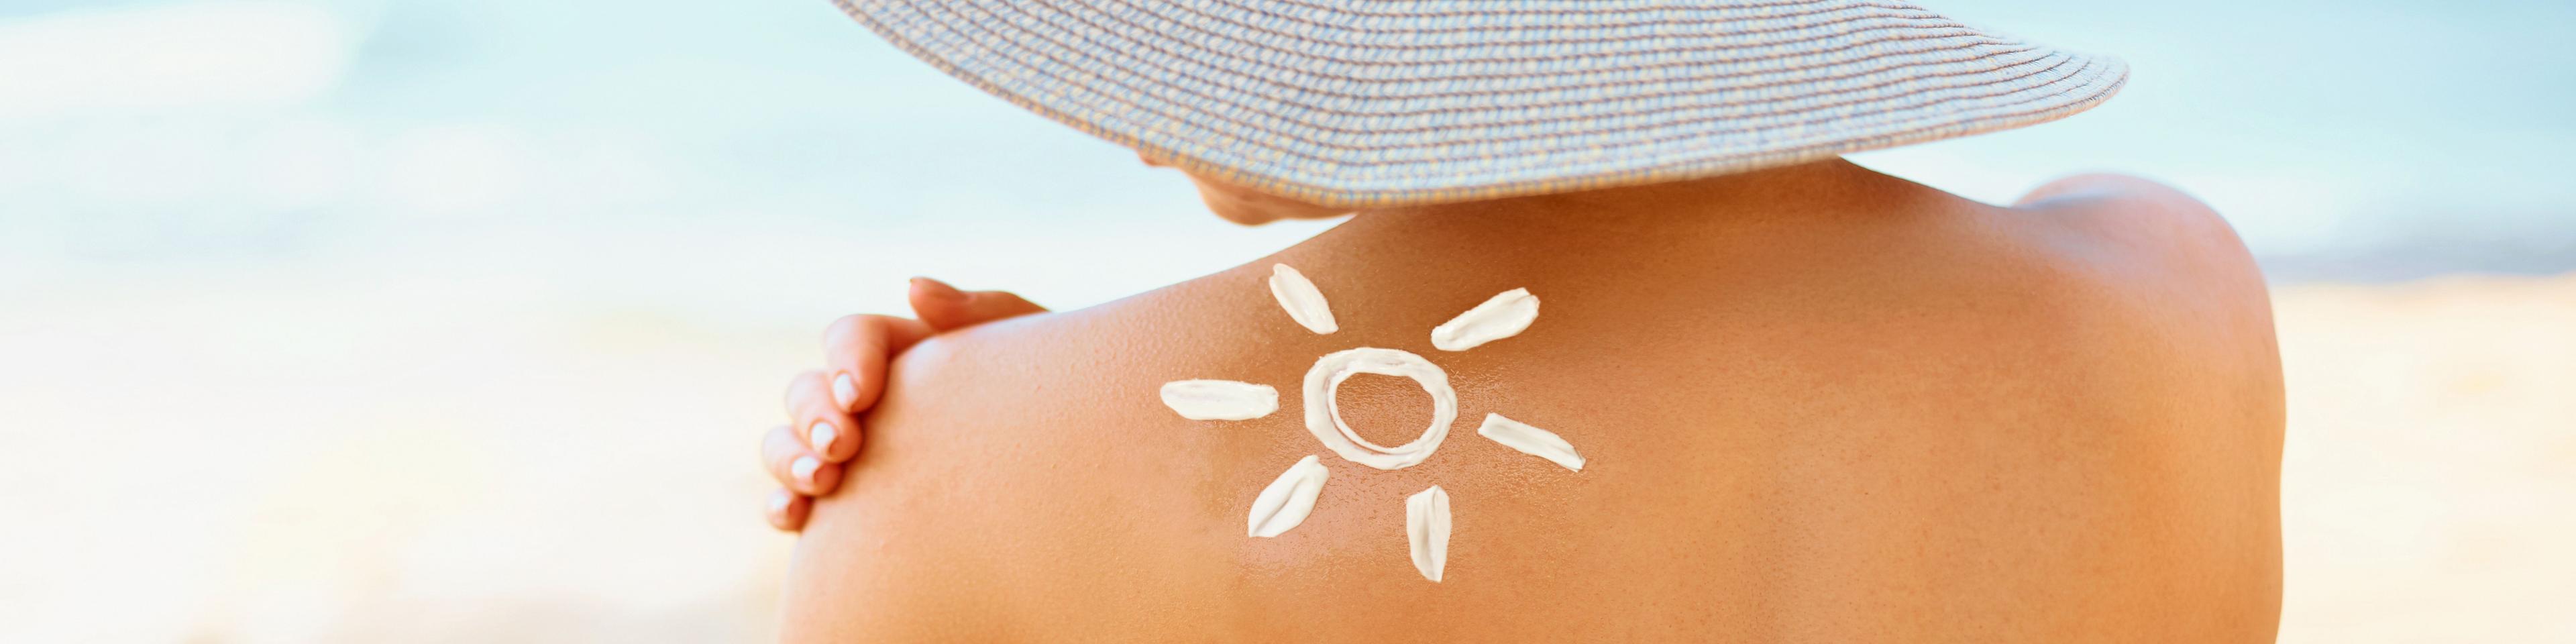 You’re Likely Applying Sunscreen Incorrectly – Here’s How to Protect Your Skin from the Sun and Avoid Damage